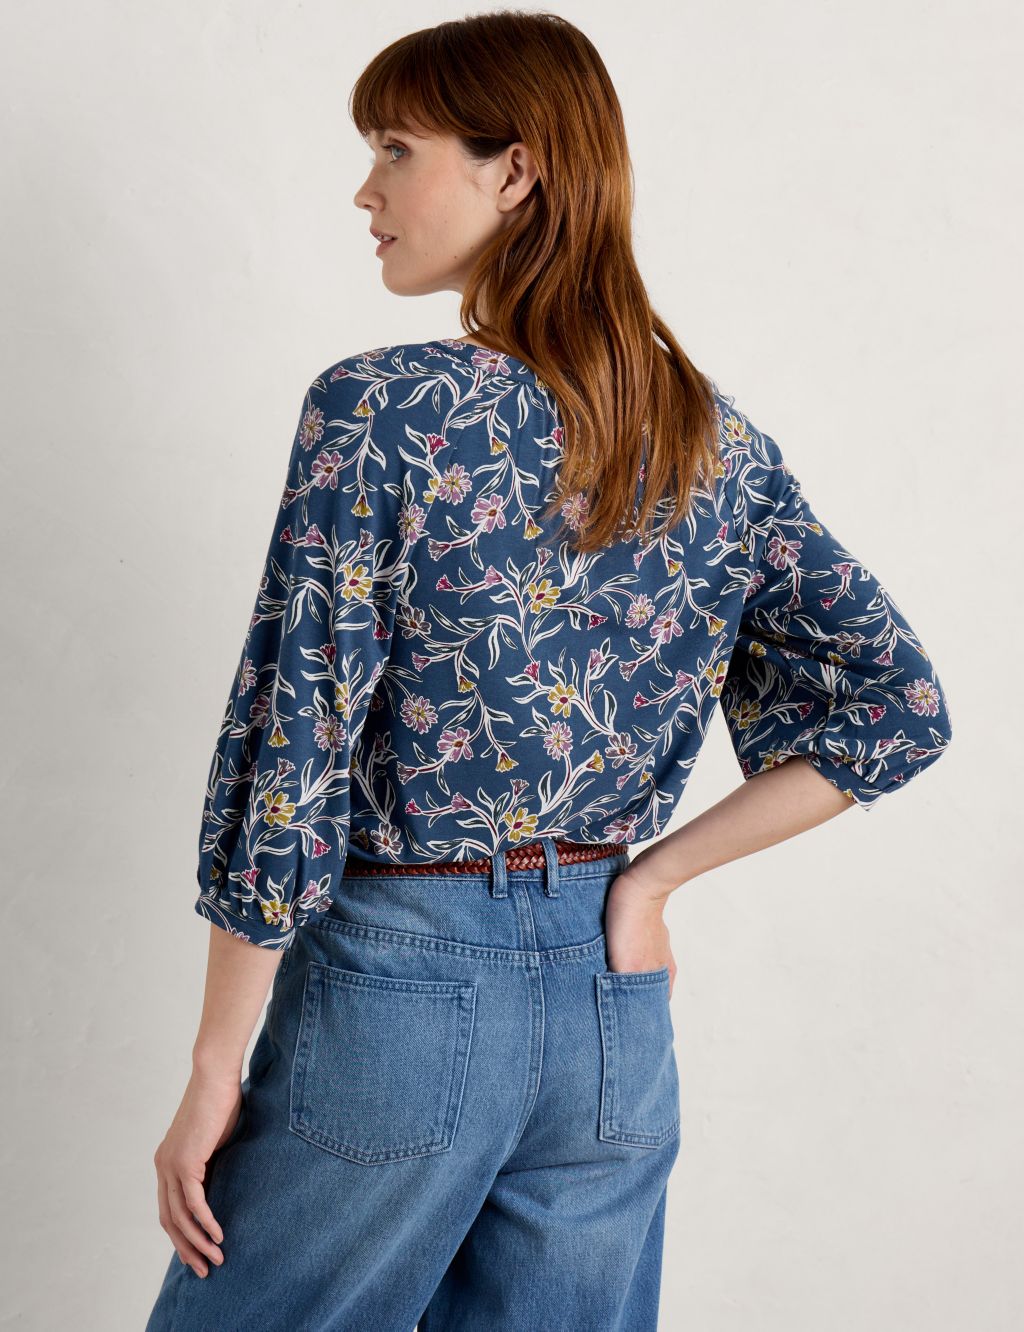 Floral Top With Cotton image 4